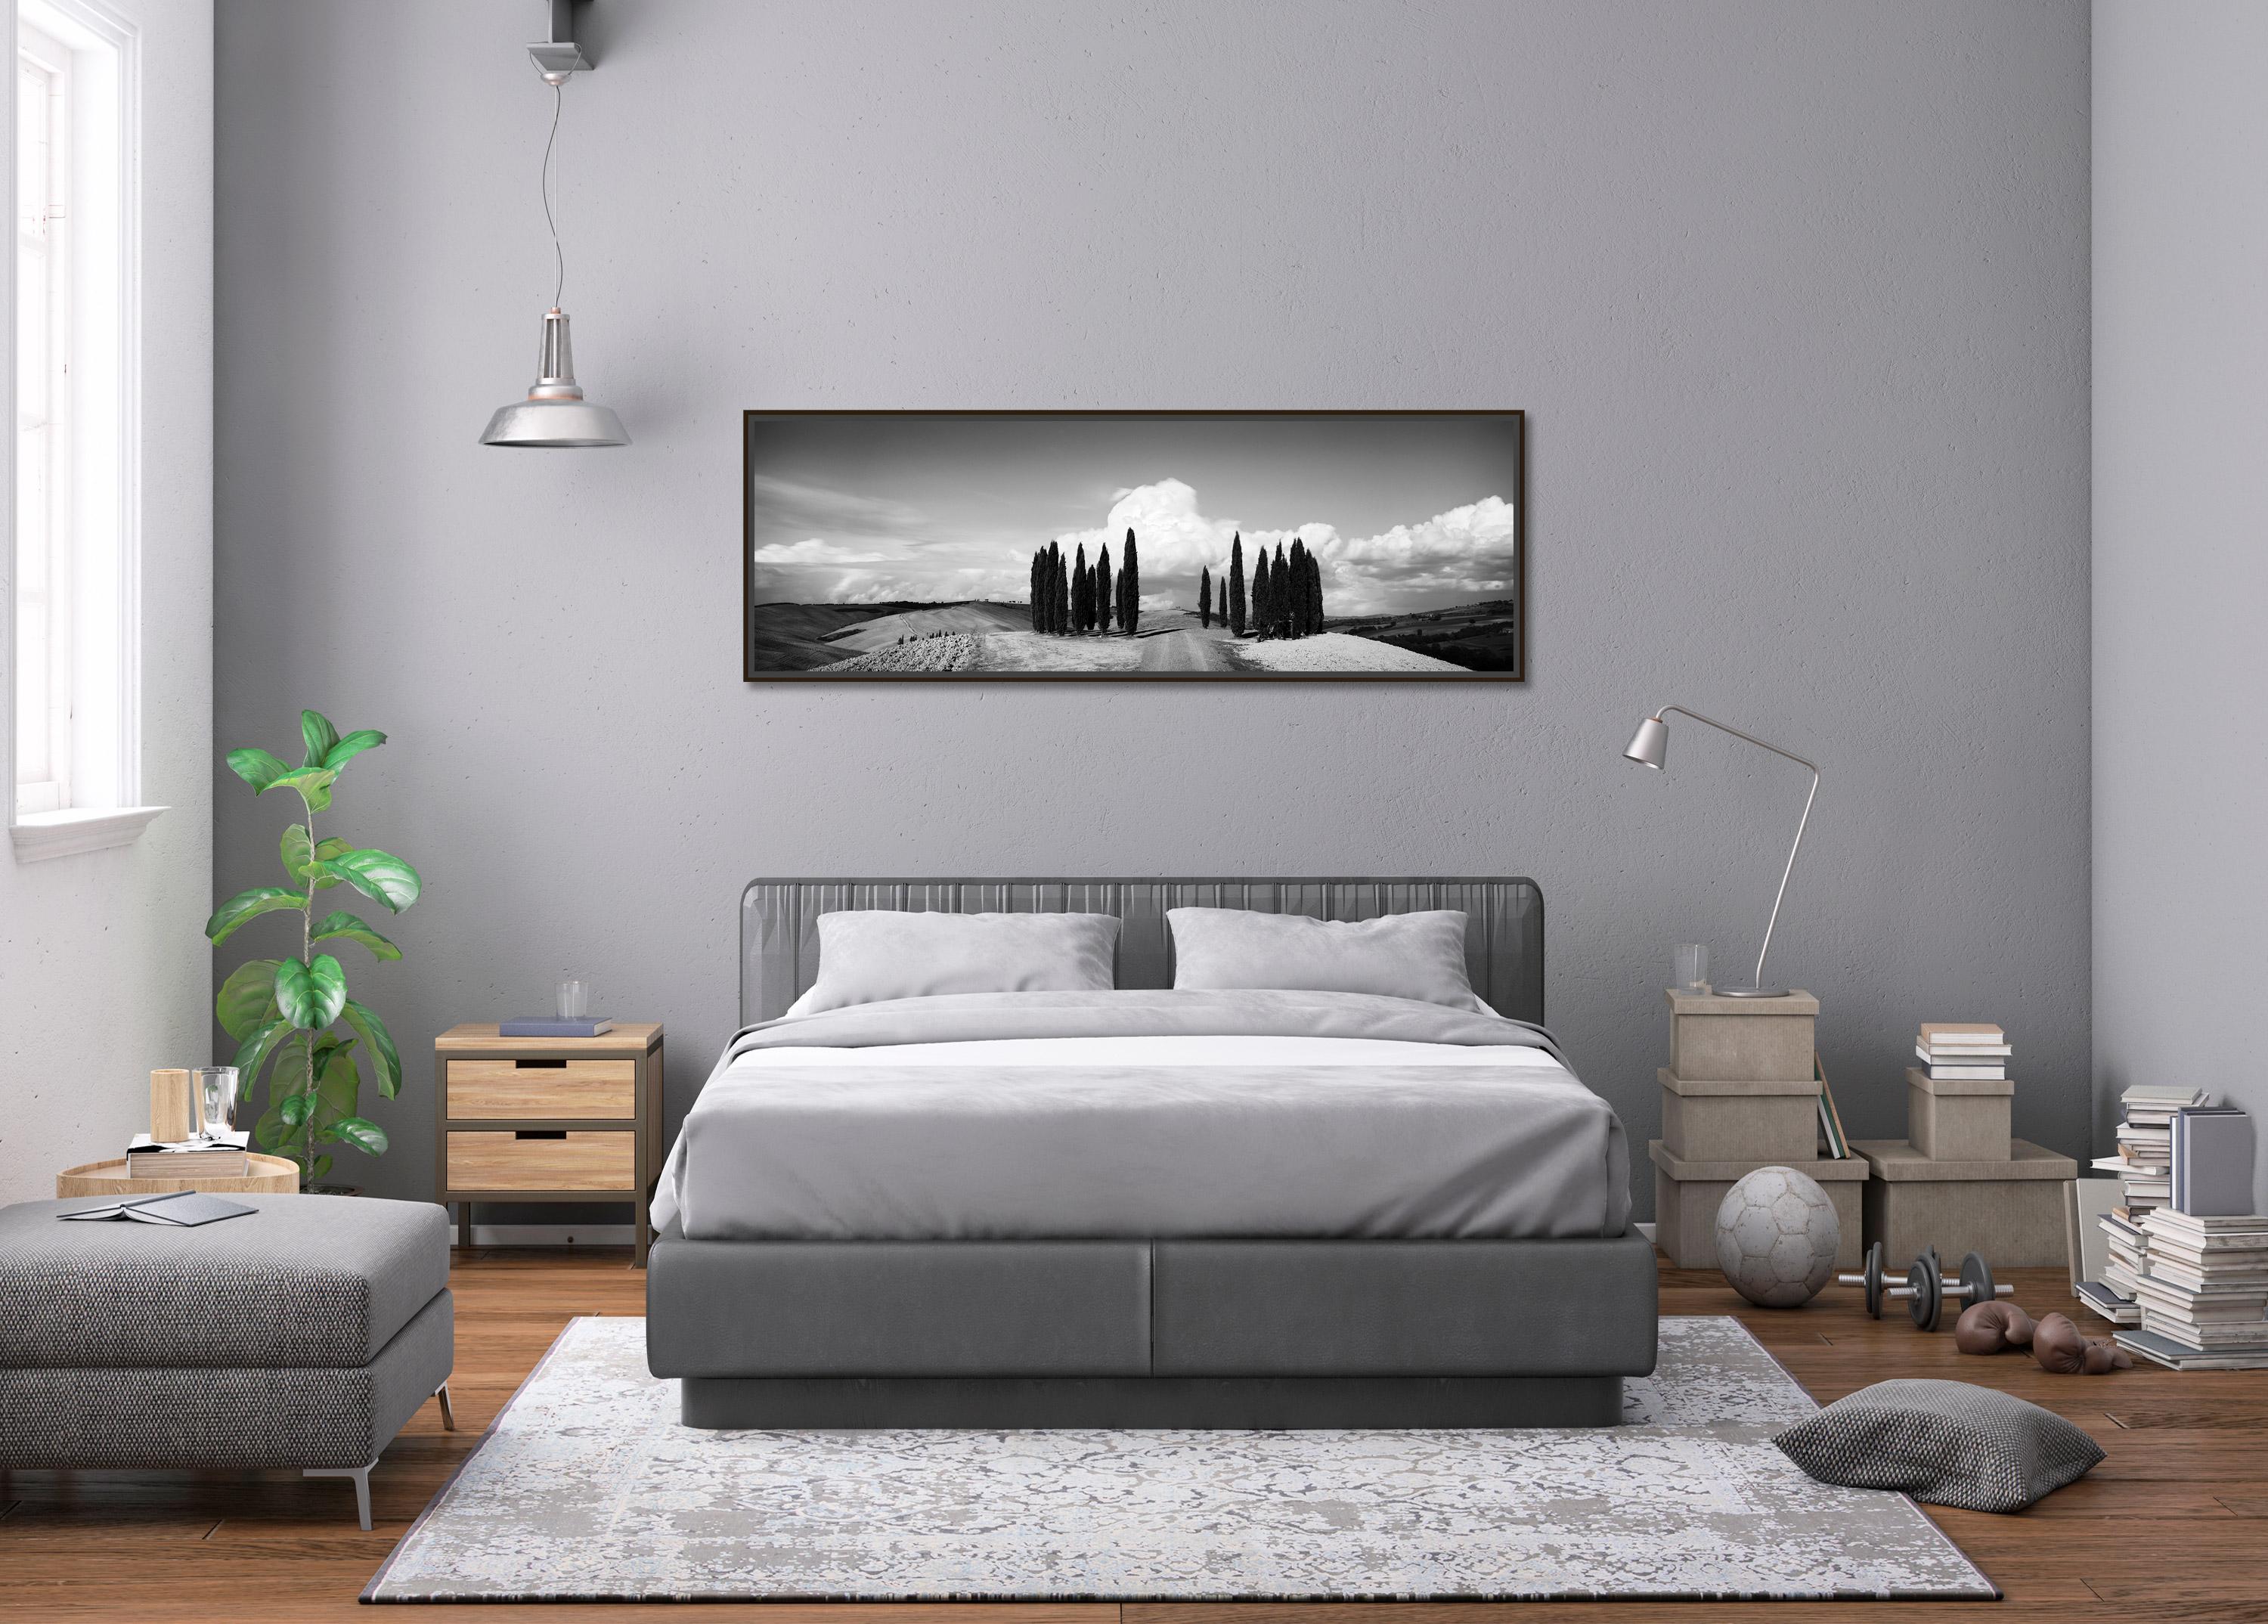 Black and white fine art panorama photography print. Cypress circle in the mountains of Tuscany, Italy with big clouds. Archival pigment ink print, edition of 9. Signed, titled, dated and numbered by artist. Certificate of authenticity included.